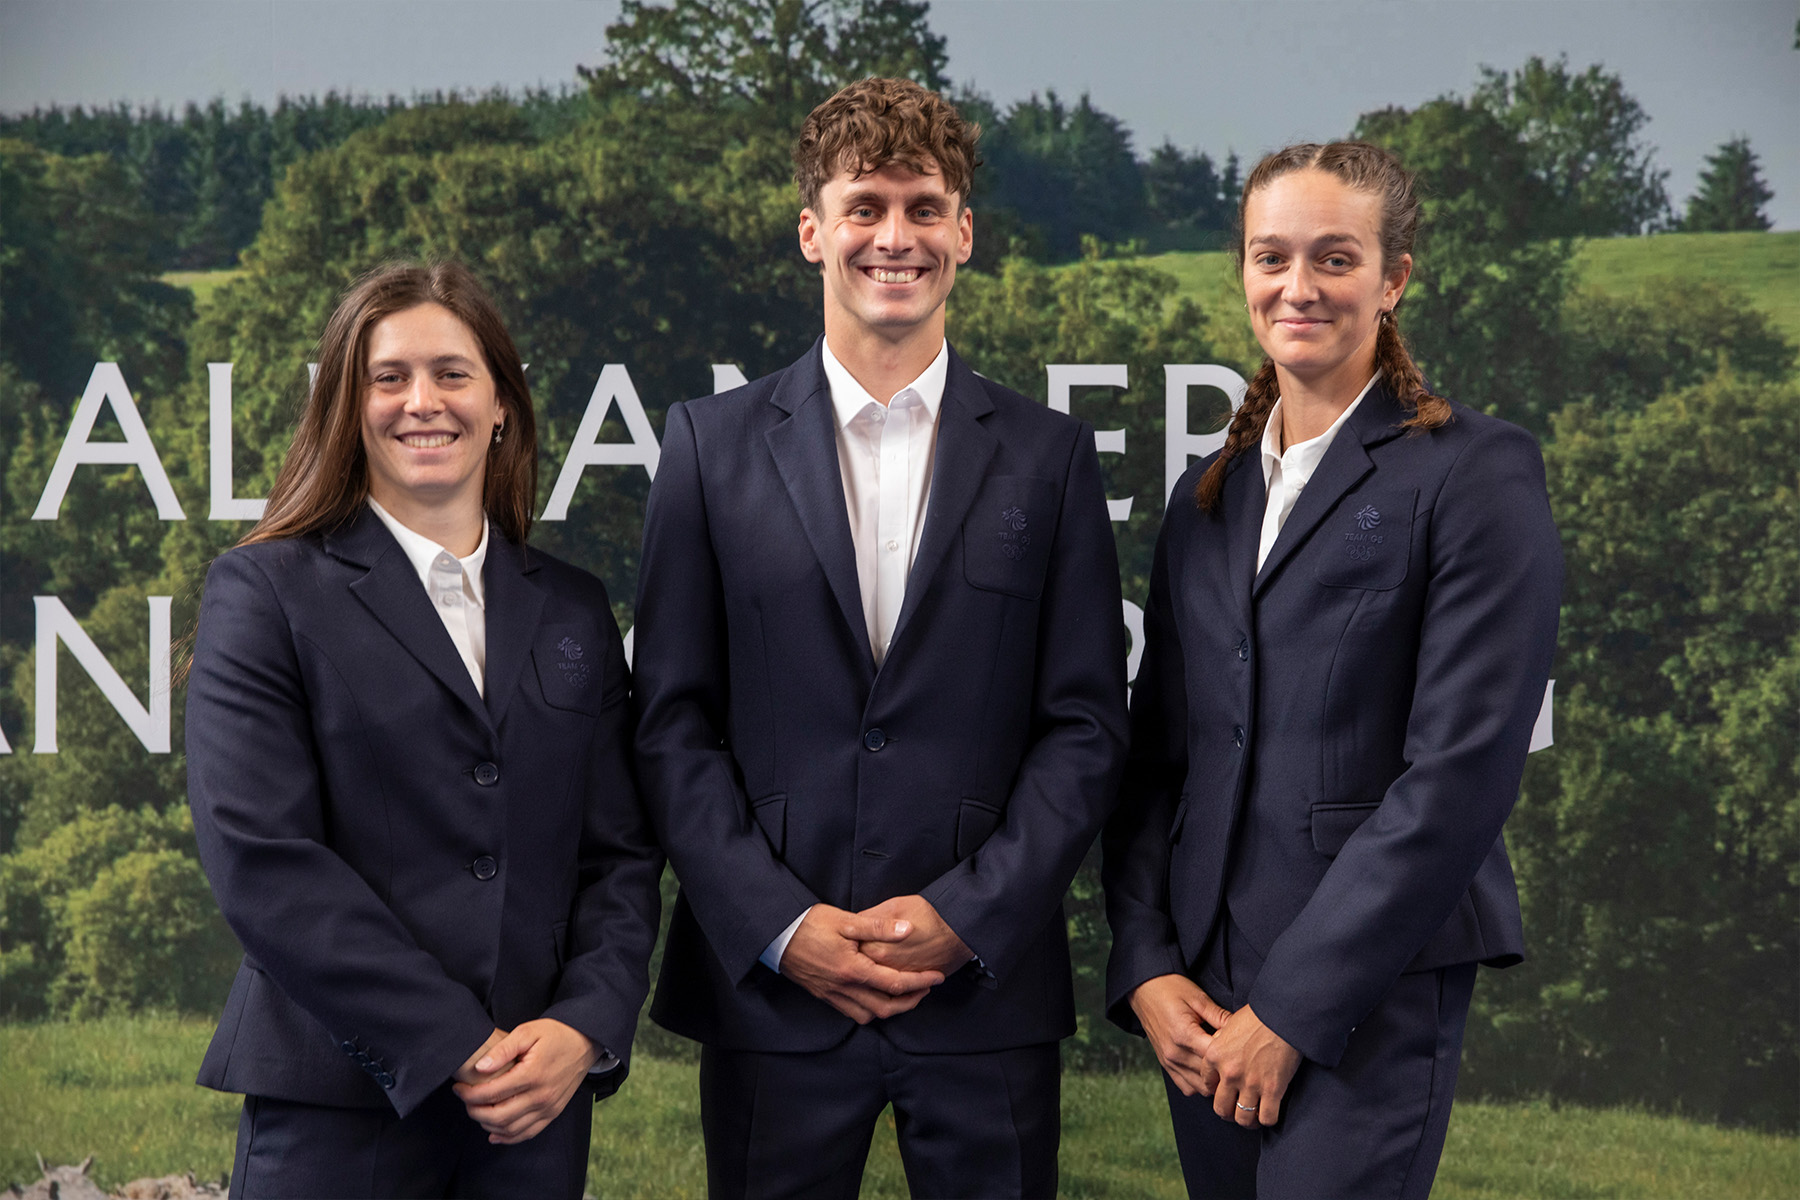 Team GB's canoe slalom athletes Kimberley Woods, Adam Burgess, Mallory Franklin dressed in luxury Scottish fashion house Alexander Manufacturing's formalwear collection